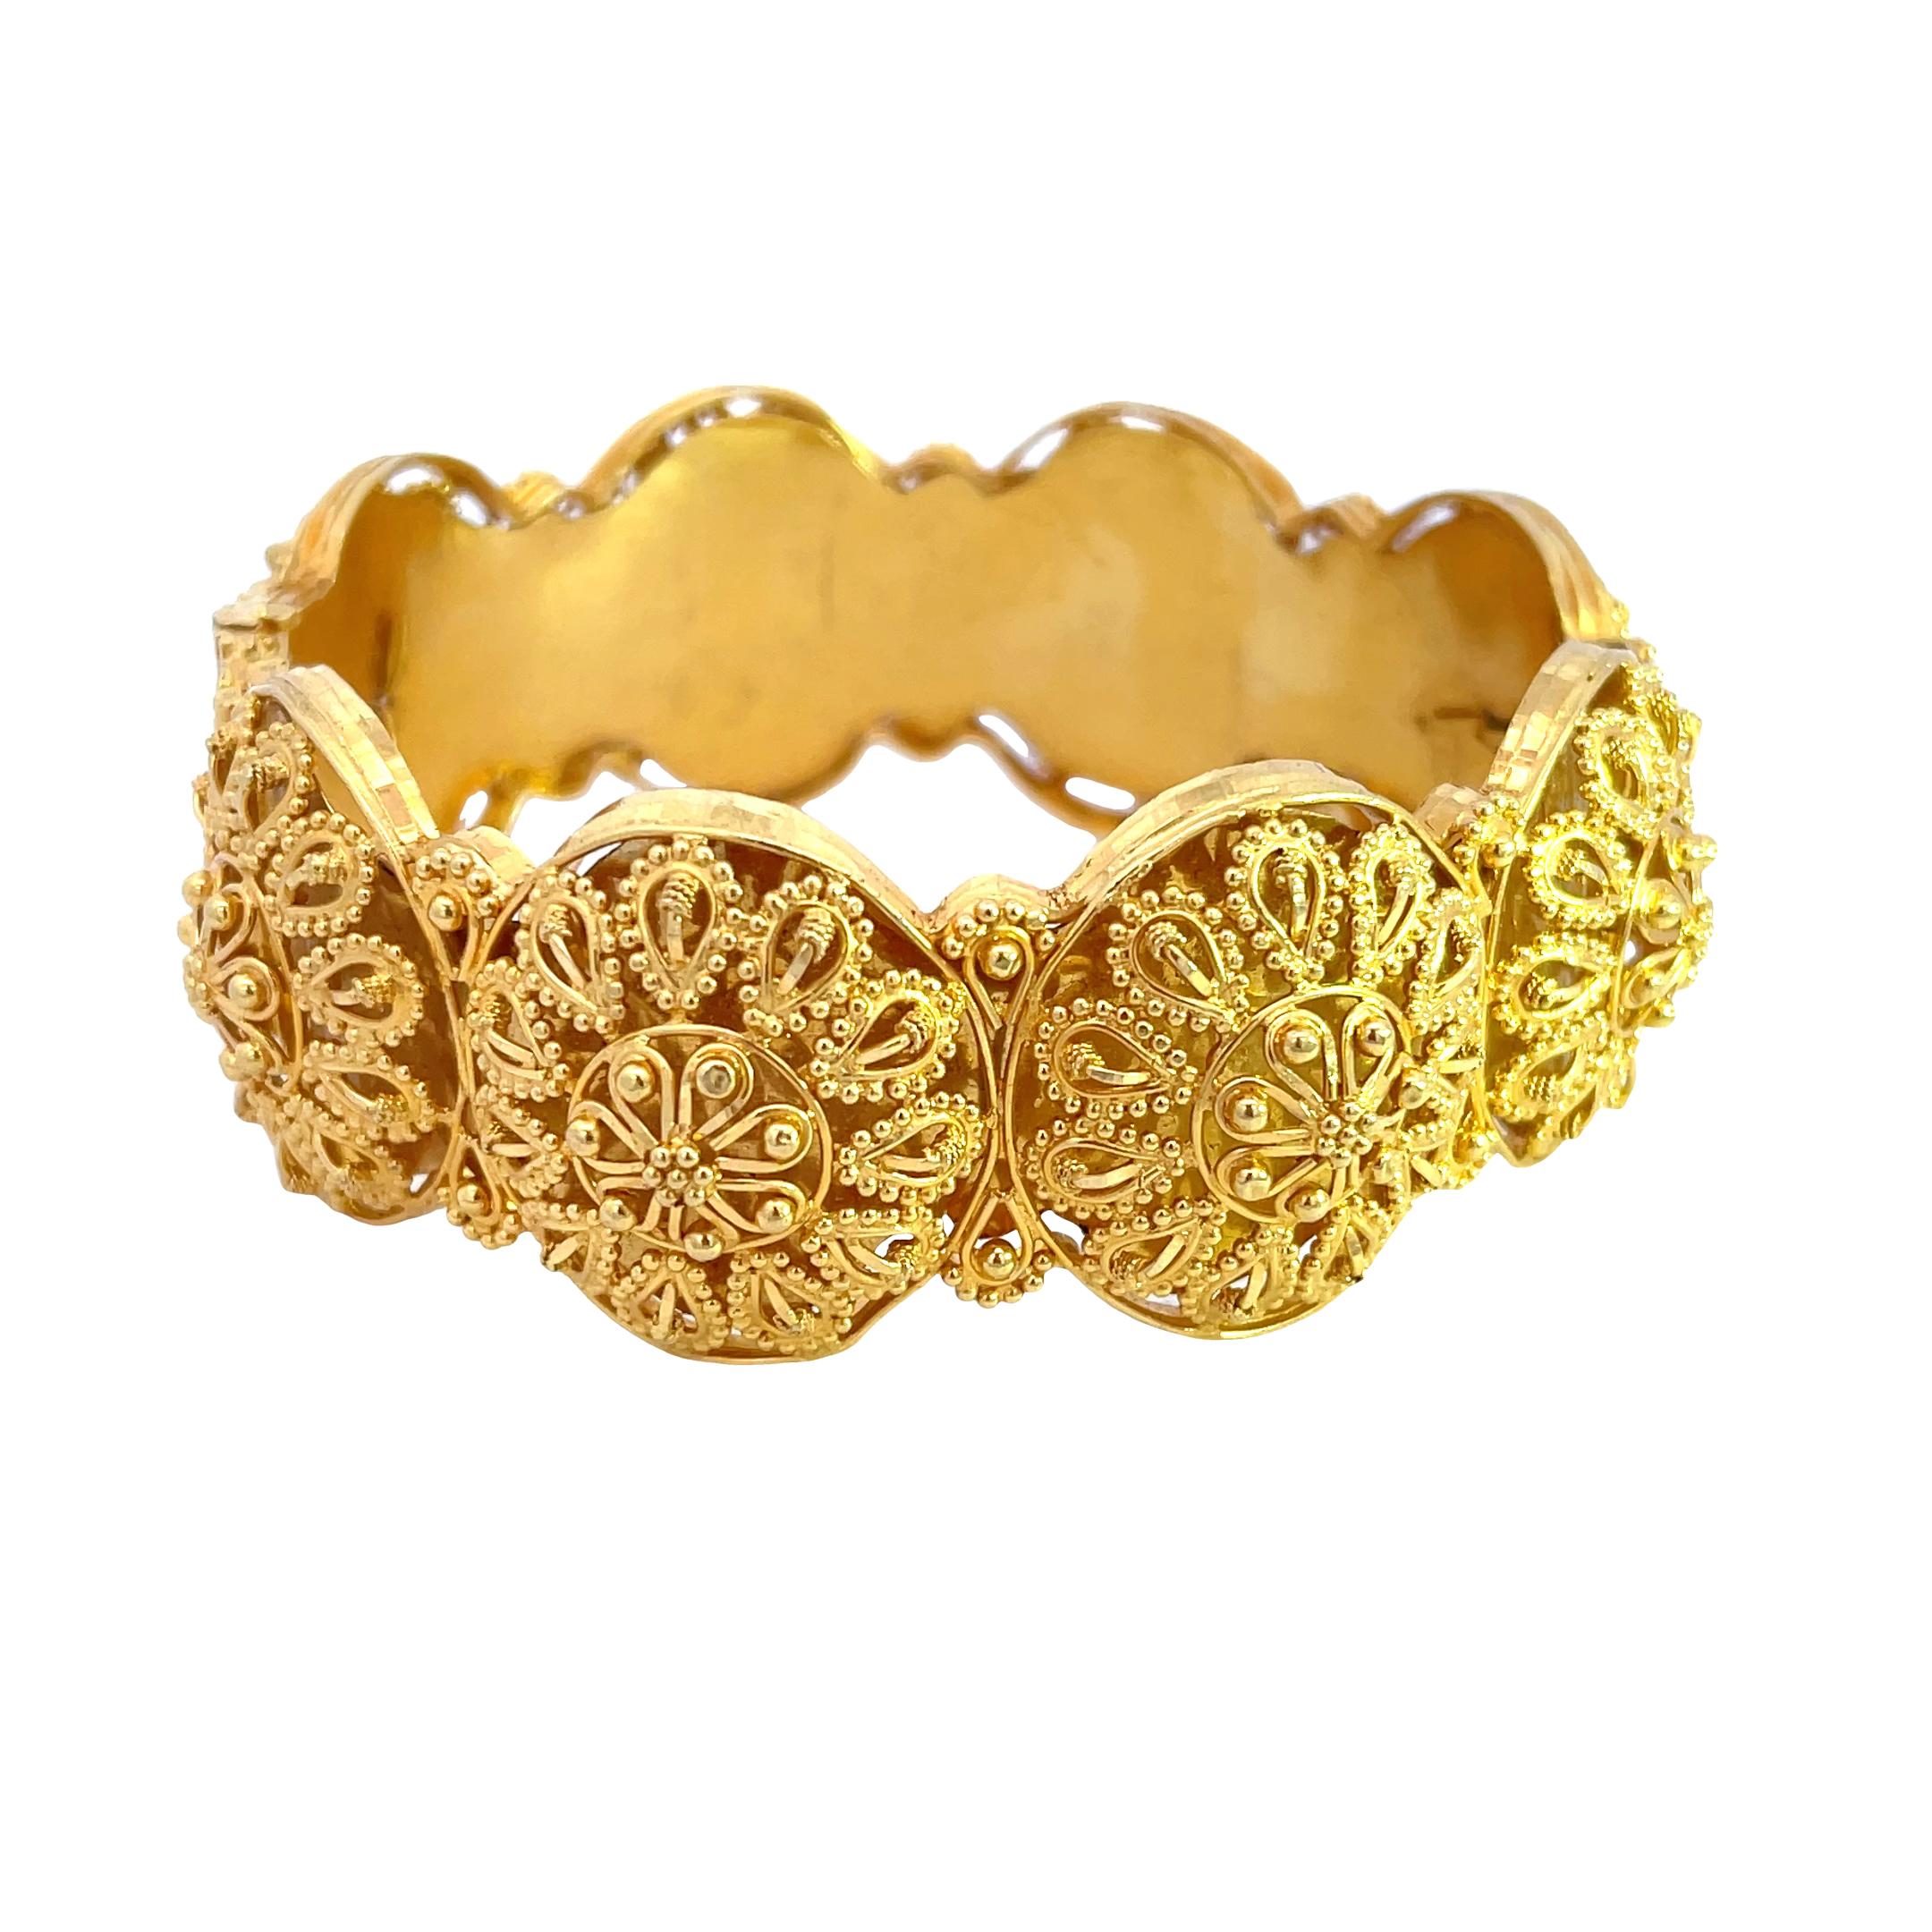 22K Yellow Gold Cuff Bangle In Excellent Condition For Sale In New York, NY